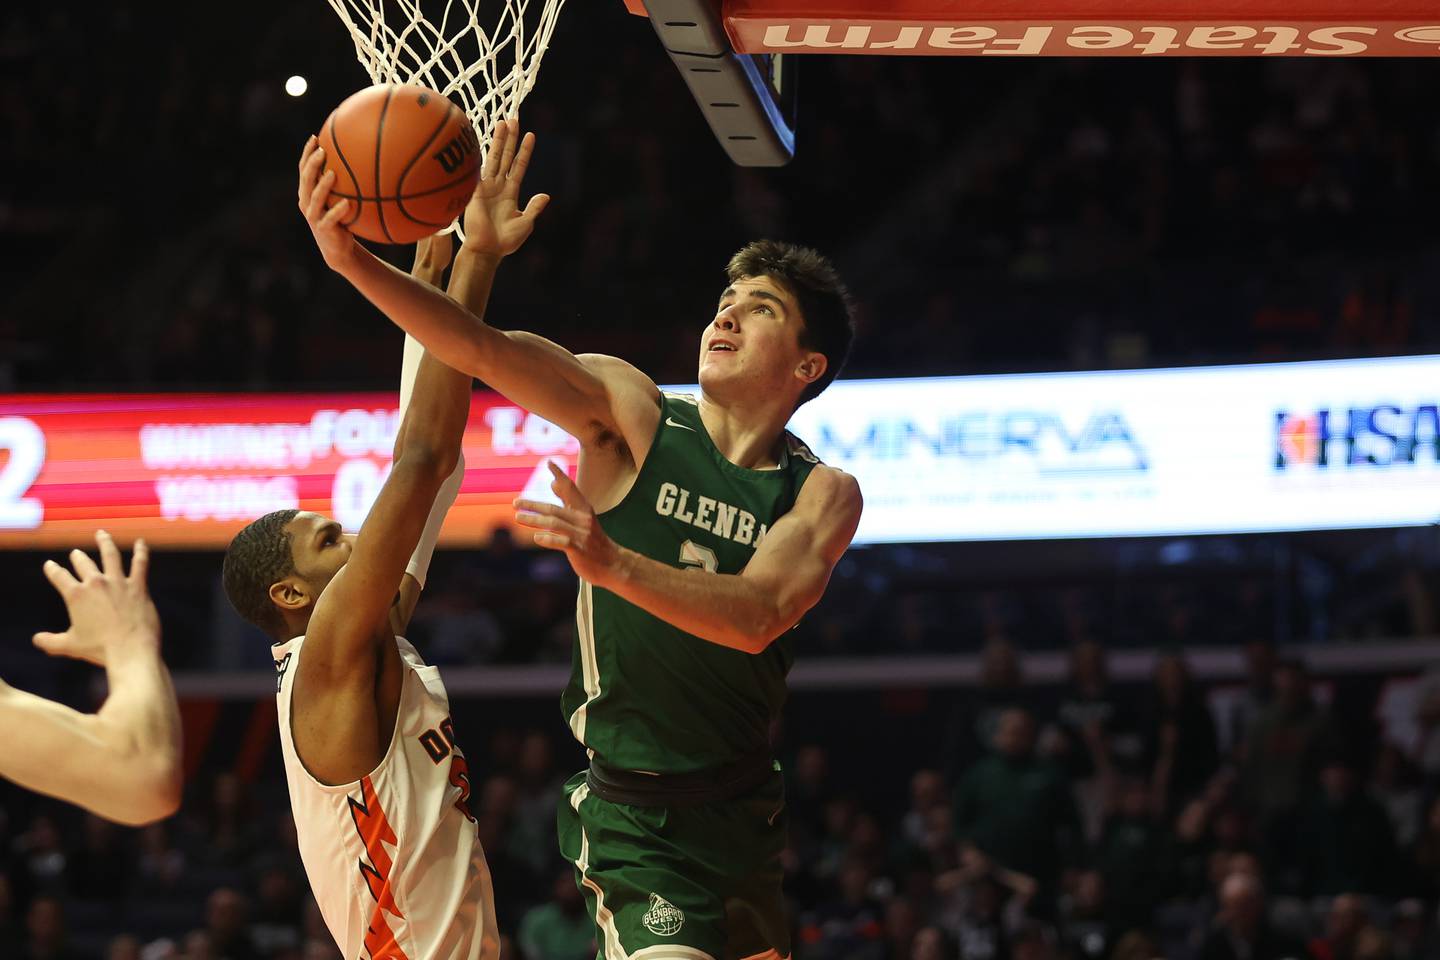 Glenbard West’s Paxton Warden puts up a windmill layup against Whitney Young in the Class 4A championship game at State Farm Center in Champaign. Saturday, Mar. 12, 2022, in Champaign.